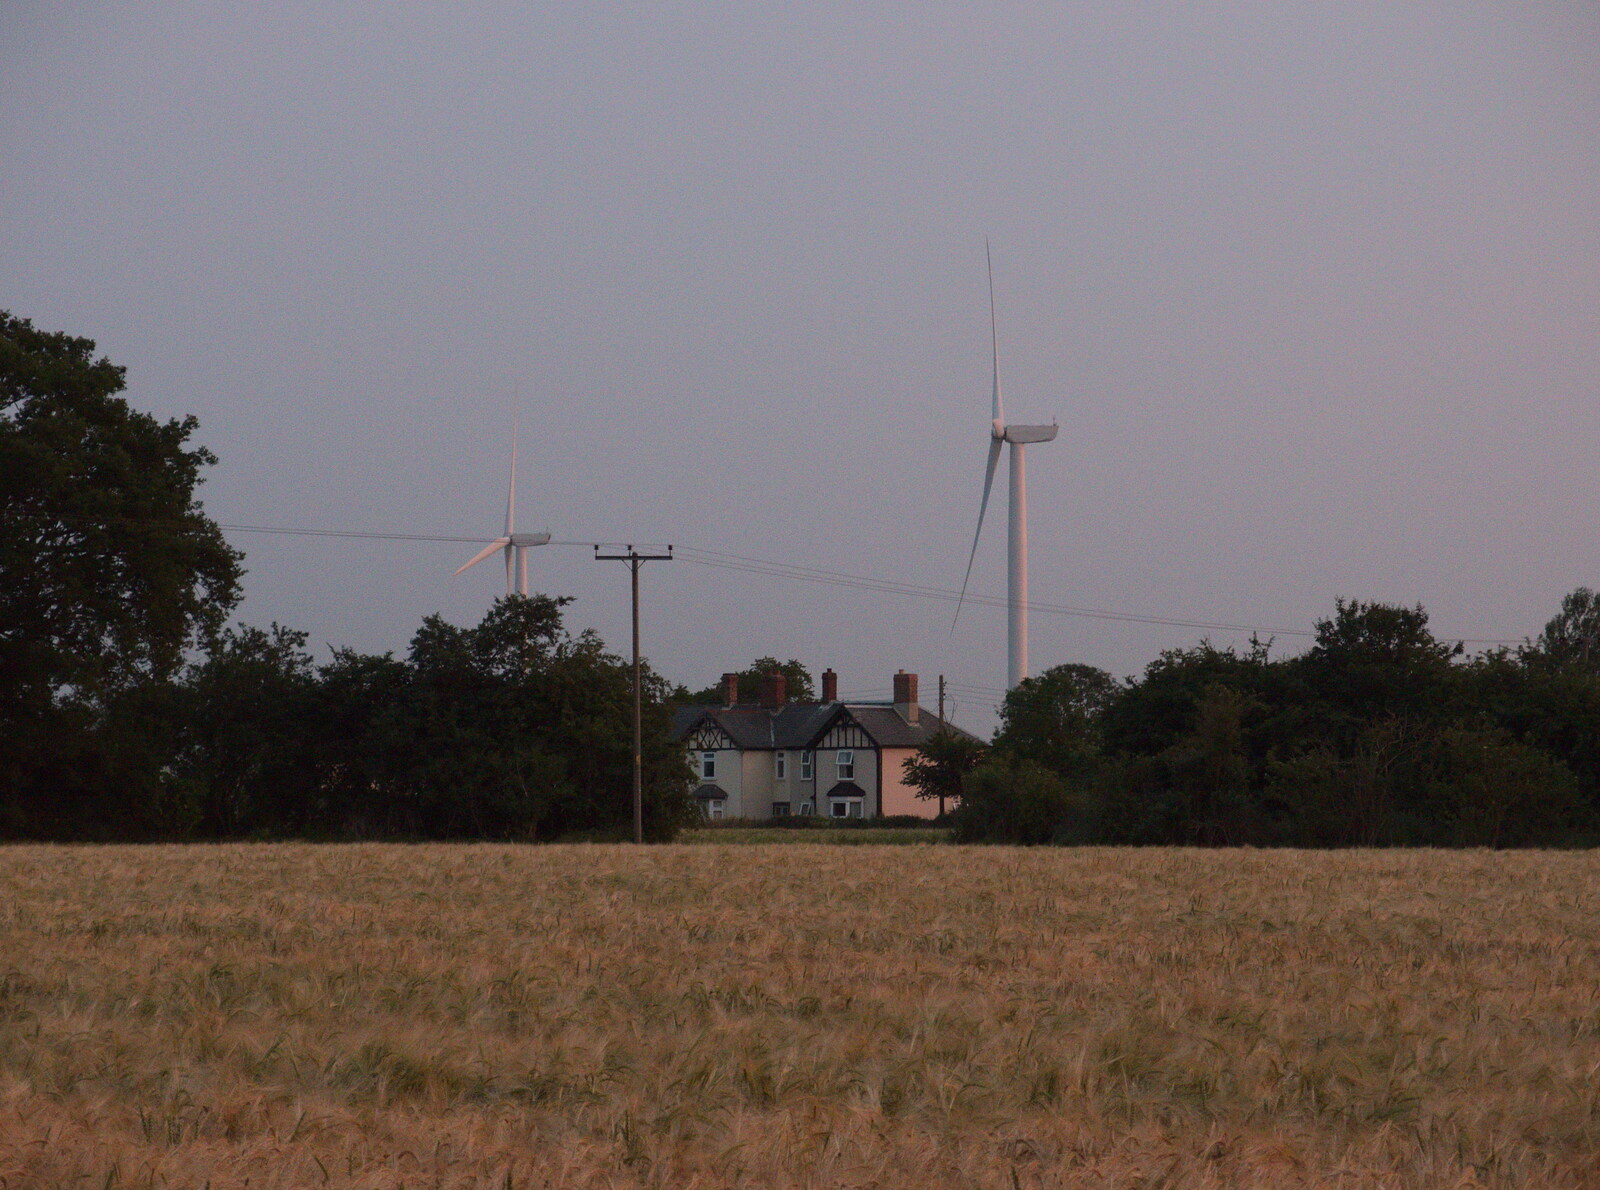 The new wind turbines from The Demolition of the Garage, Brome, Suffolk - 17th July 2013